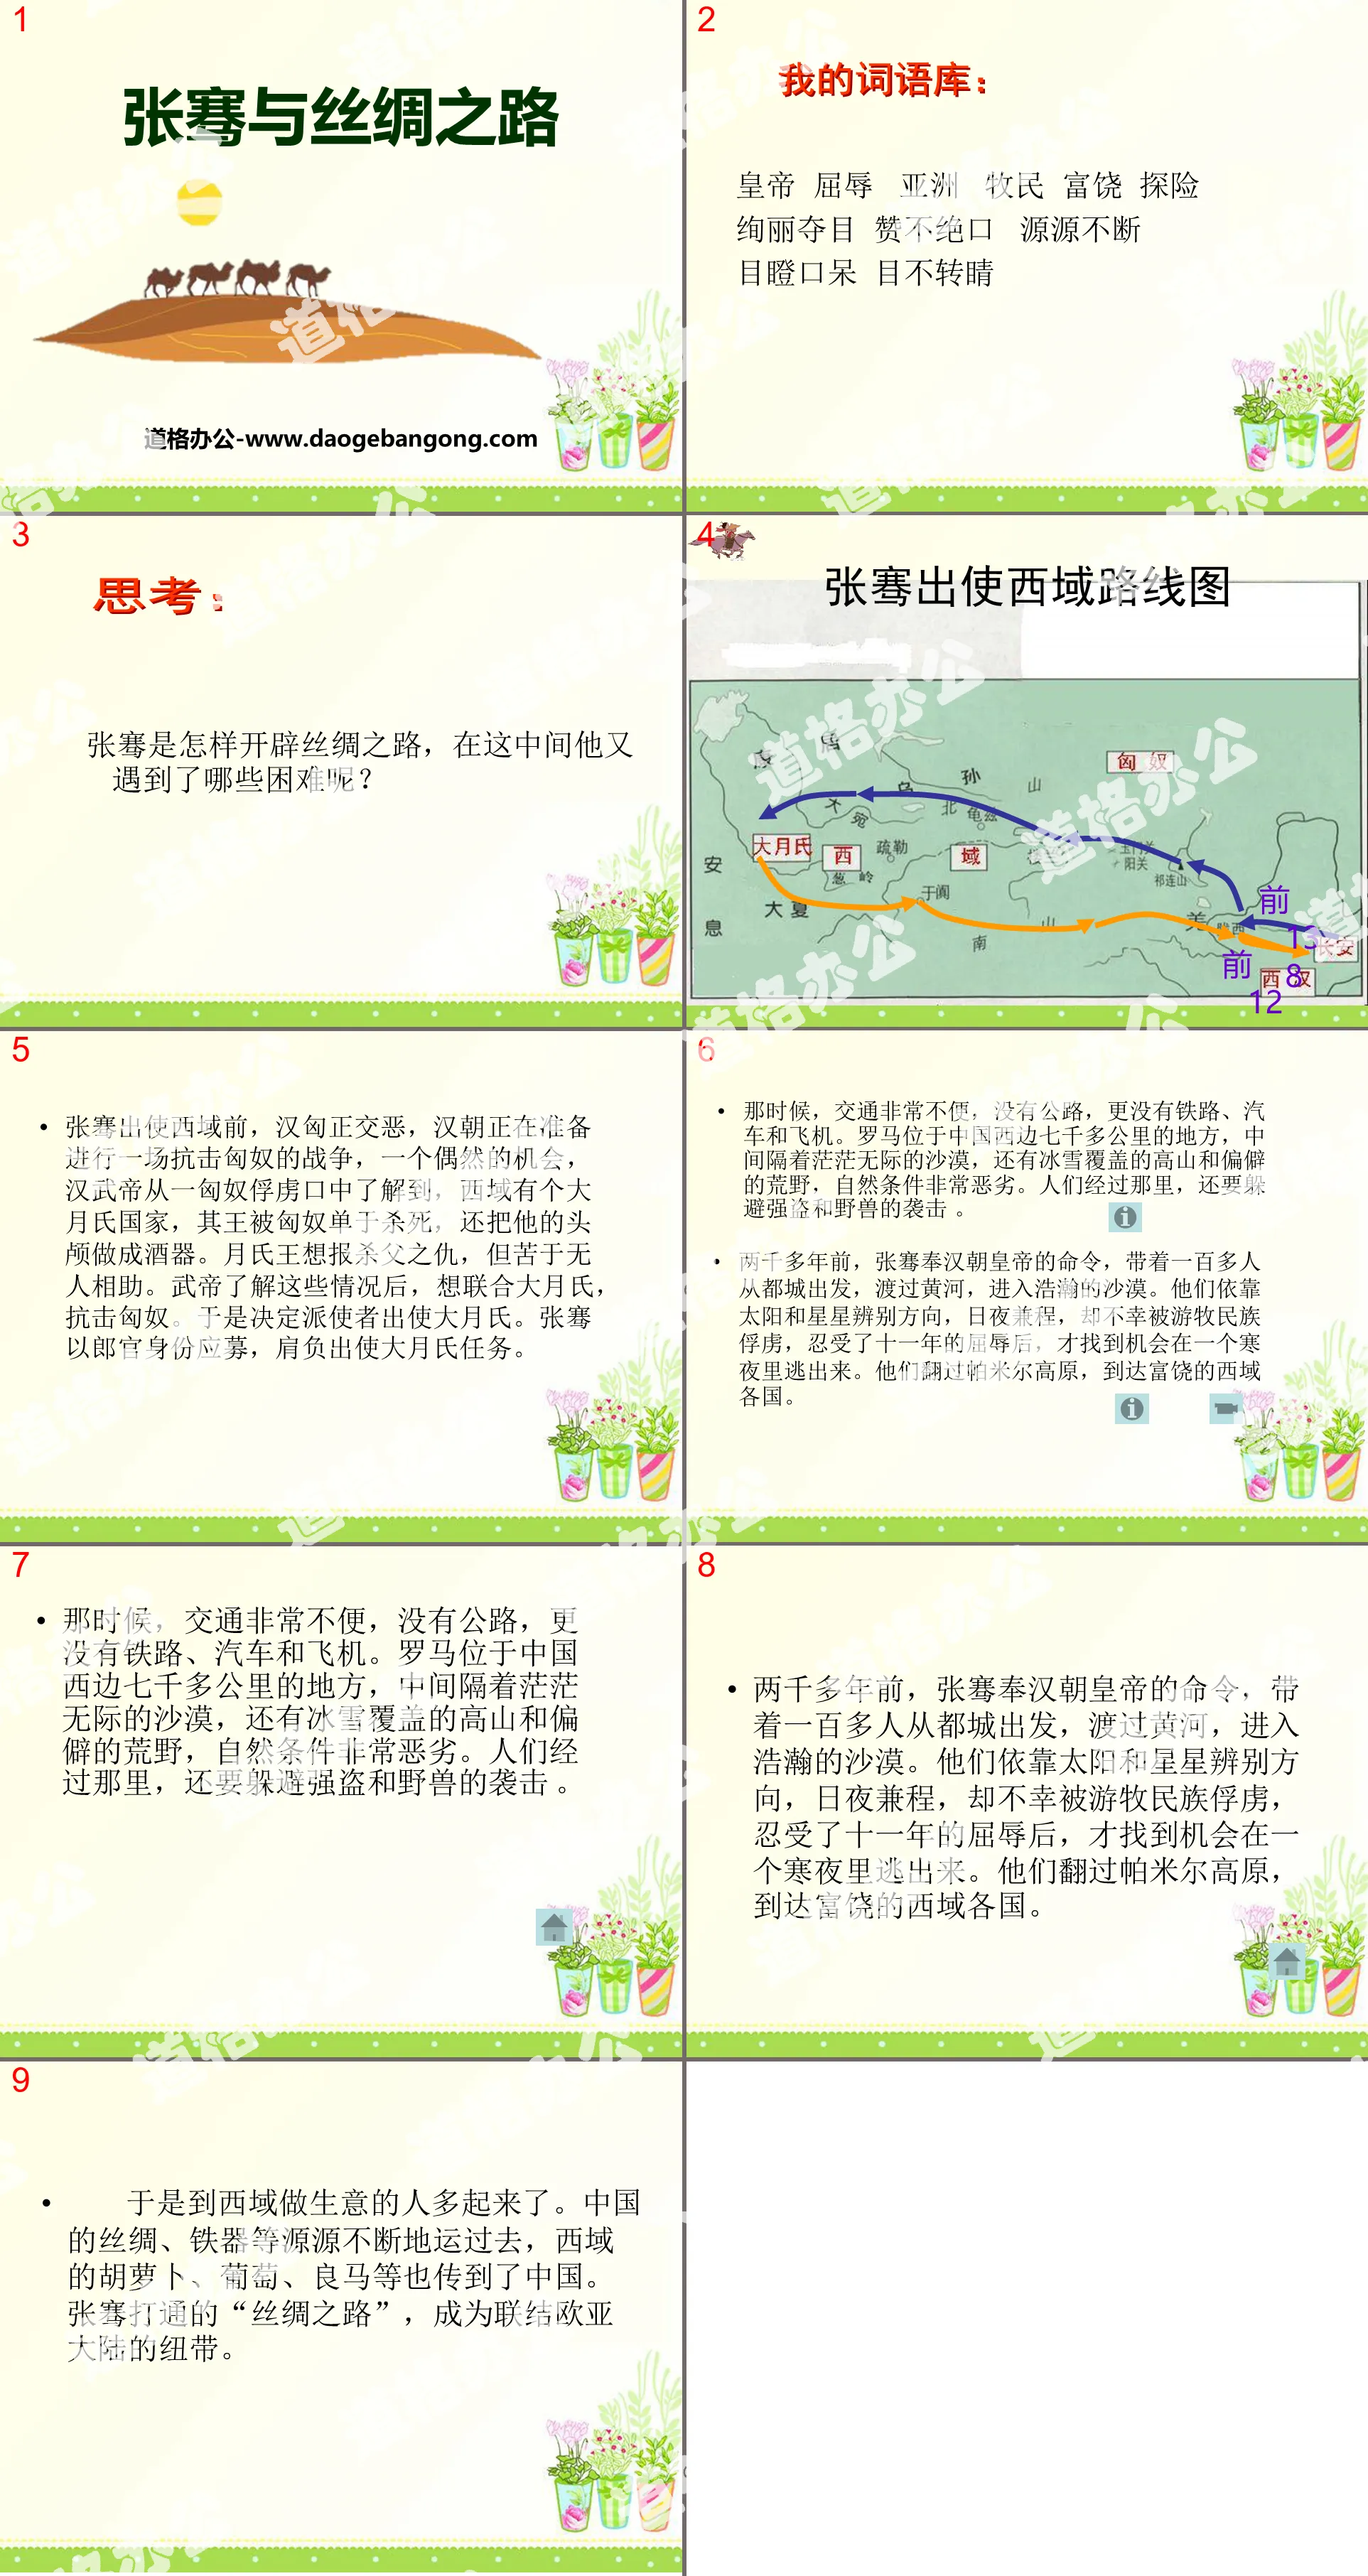 "Zhang Qian and the Silk Road" PPT courseware 3